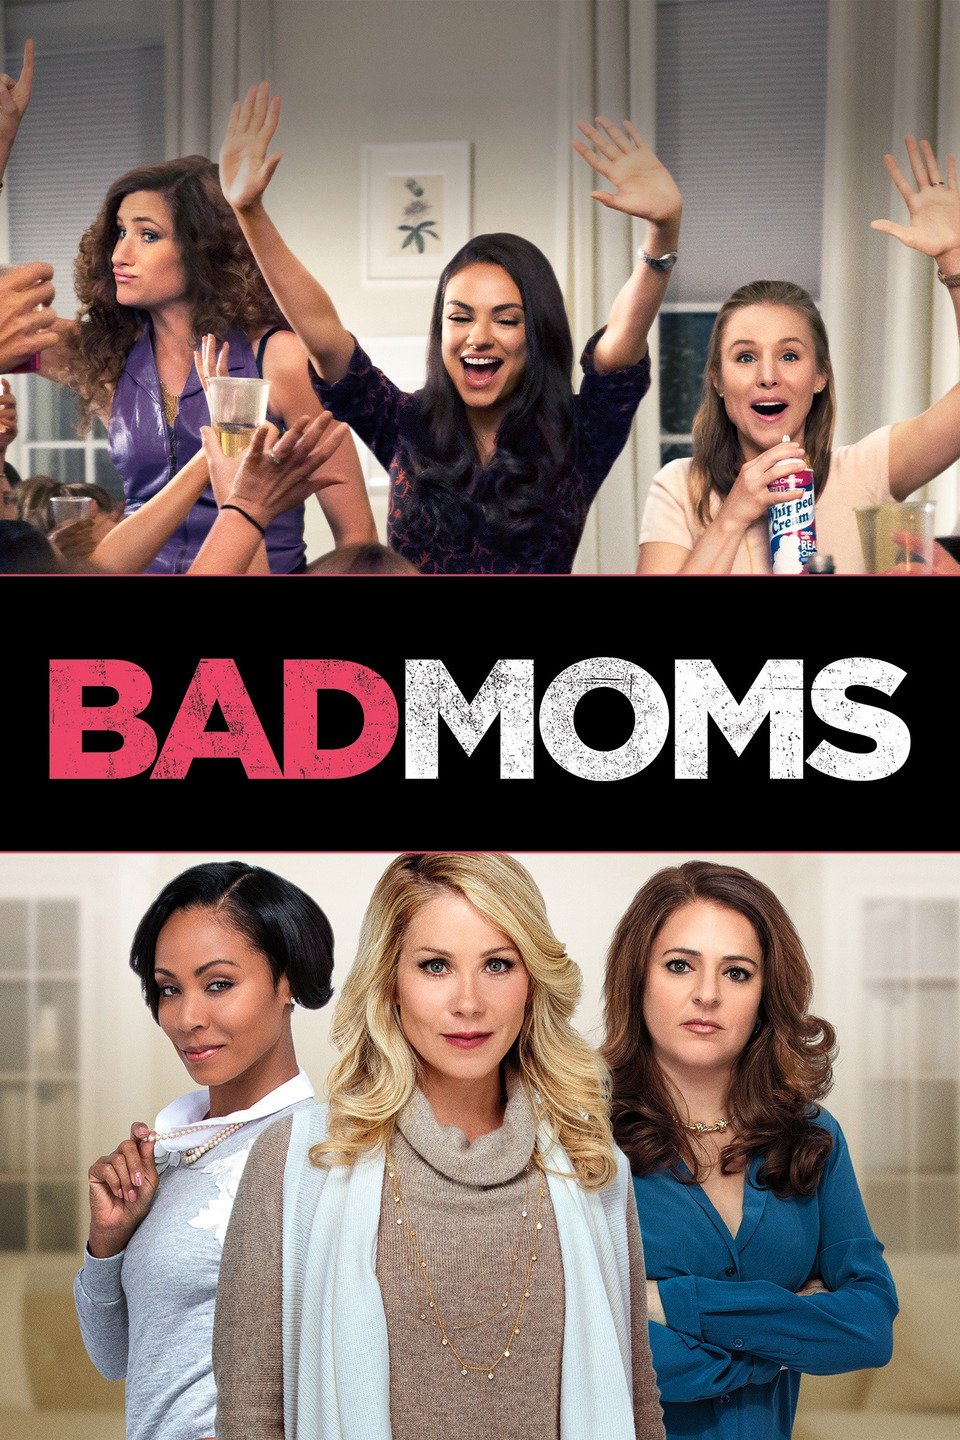 Bad Moms Trailer 2 Trailers And Videos Rotten Tomatoes